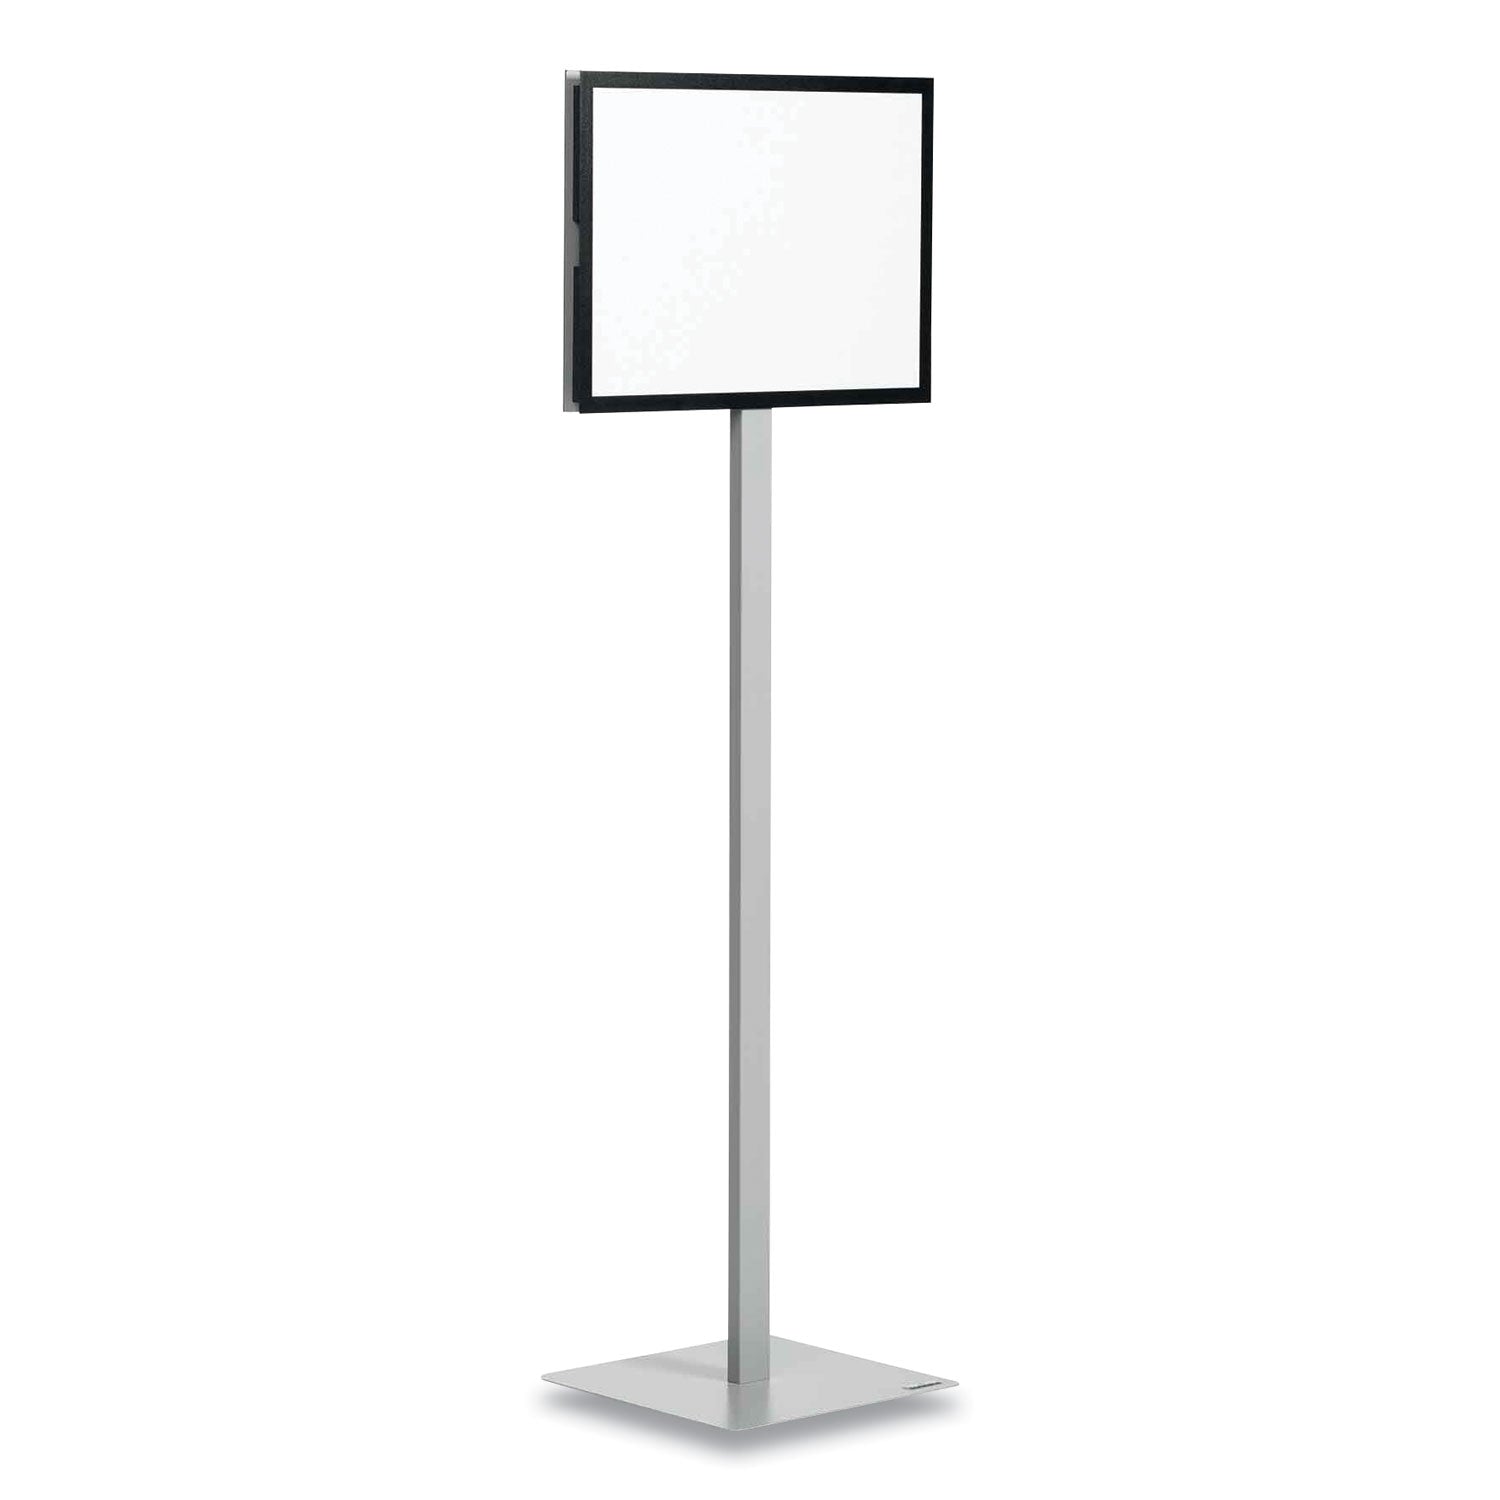 info-basic-floor-stand-5531-tall-black-stand-11-x-17-face_dbl501157 - 1